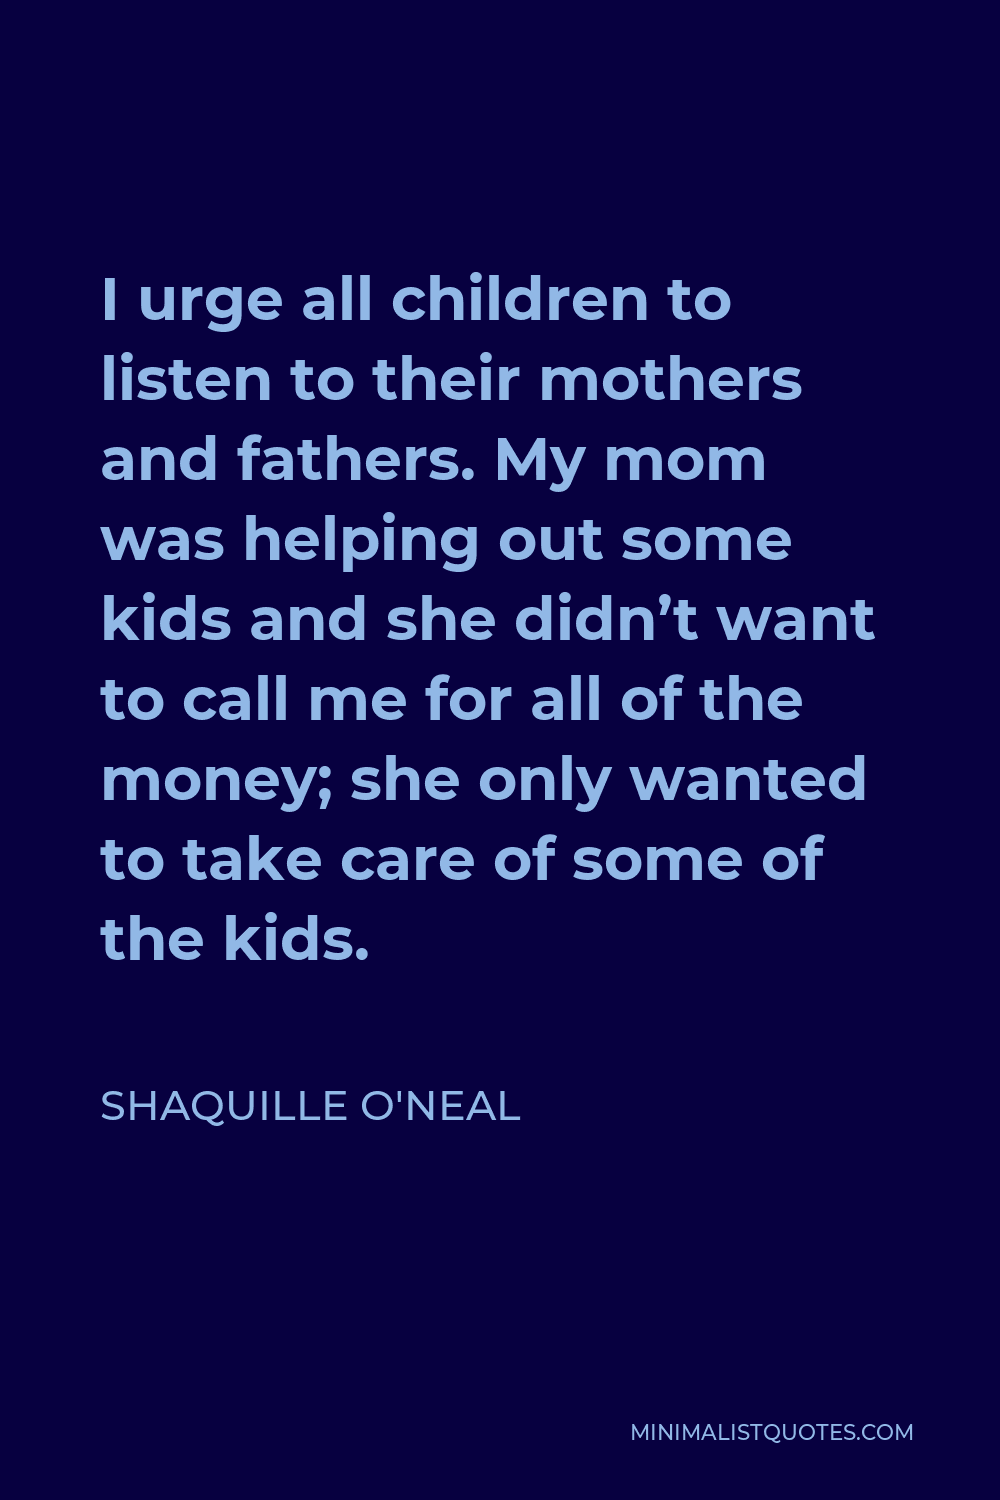 Shaquille O'Neal Quote - I urge all children to listen to their mothers and fathers. My mom was helping out some kids and she didn’t want to call me for all of the money; she only wanted to take care of some of the kids.